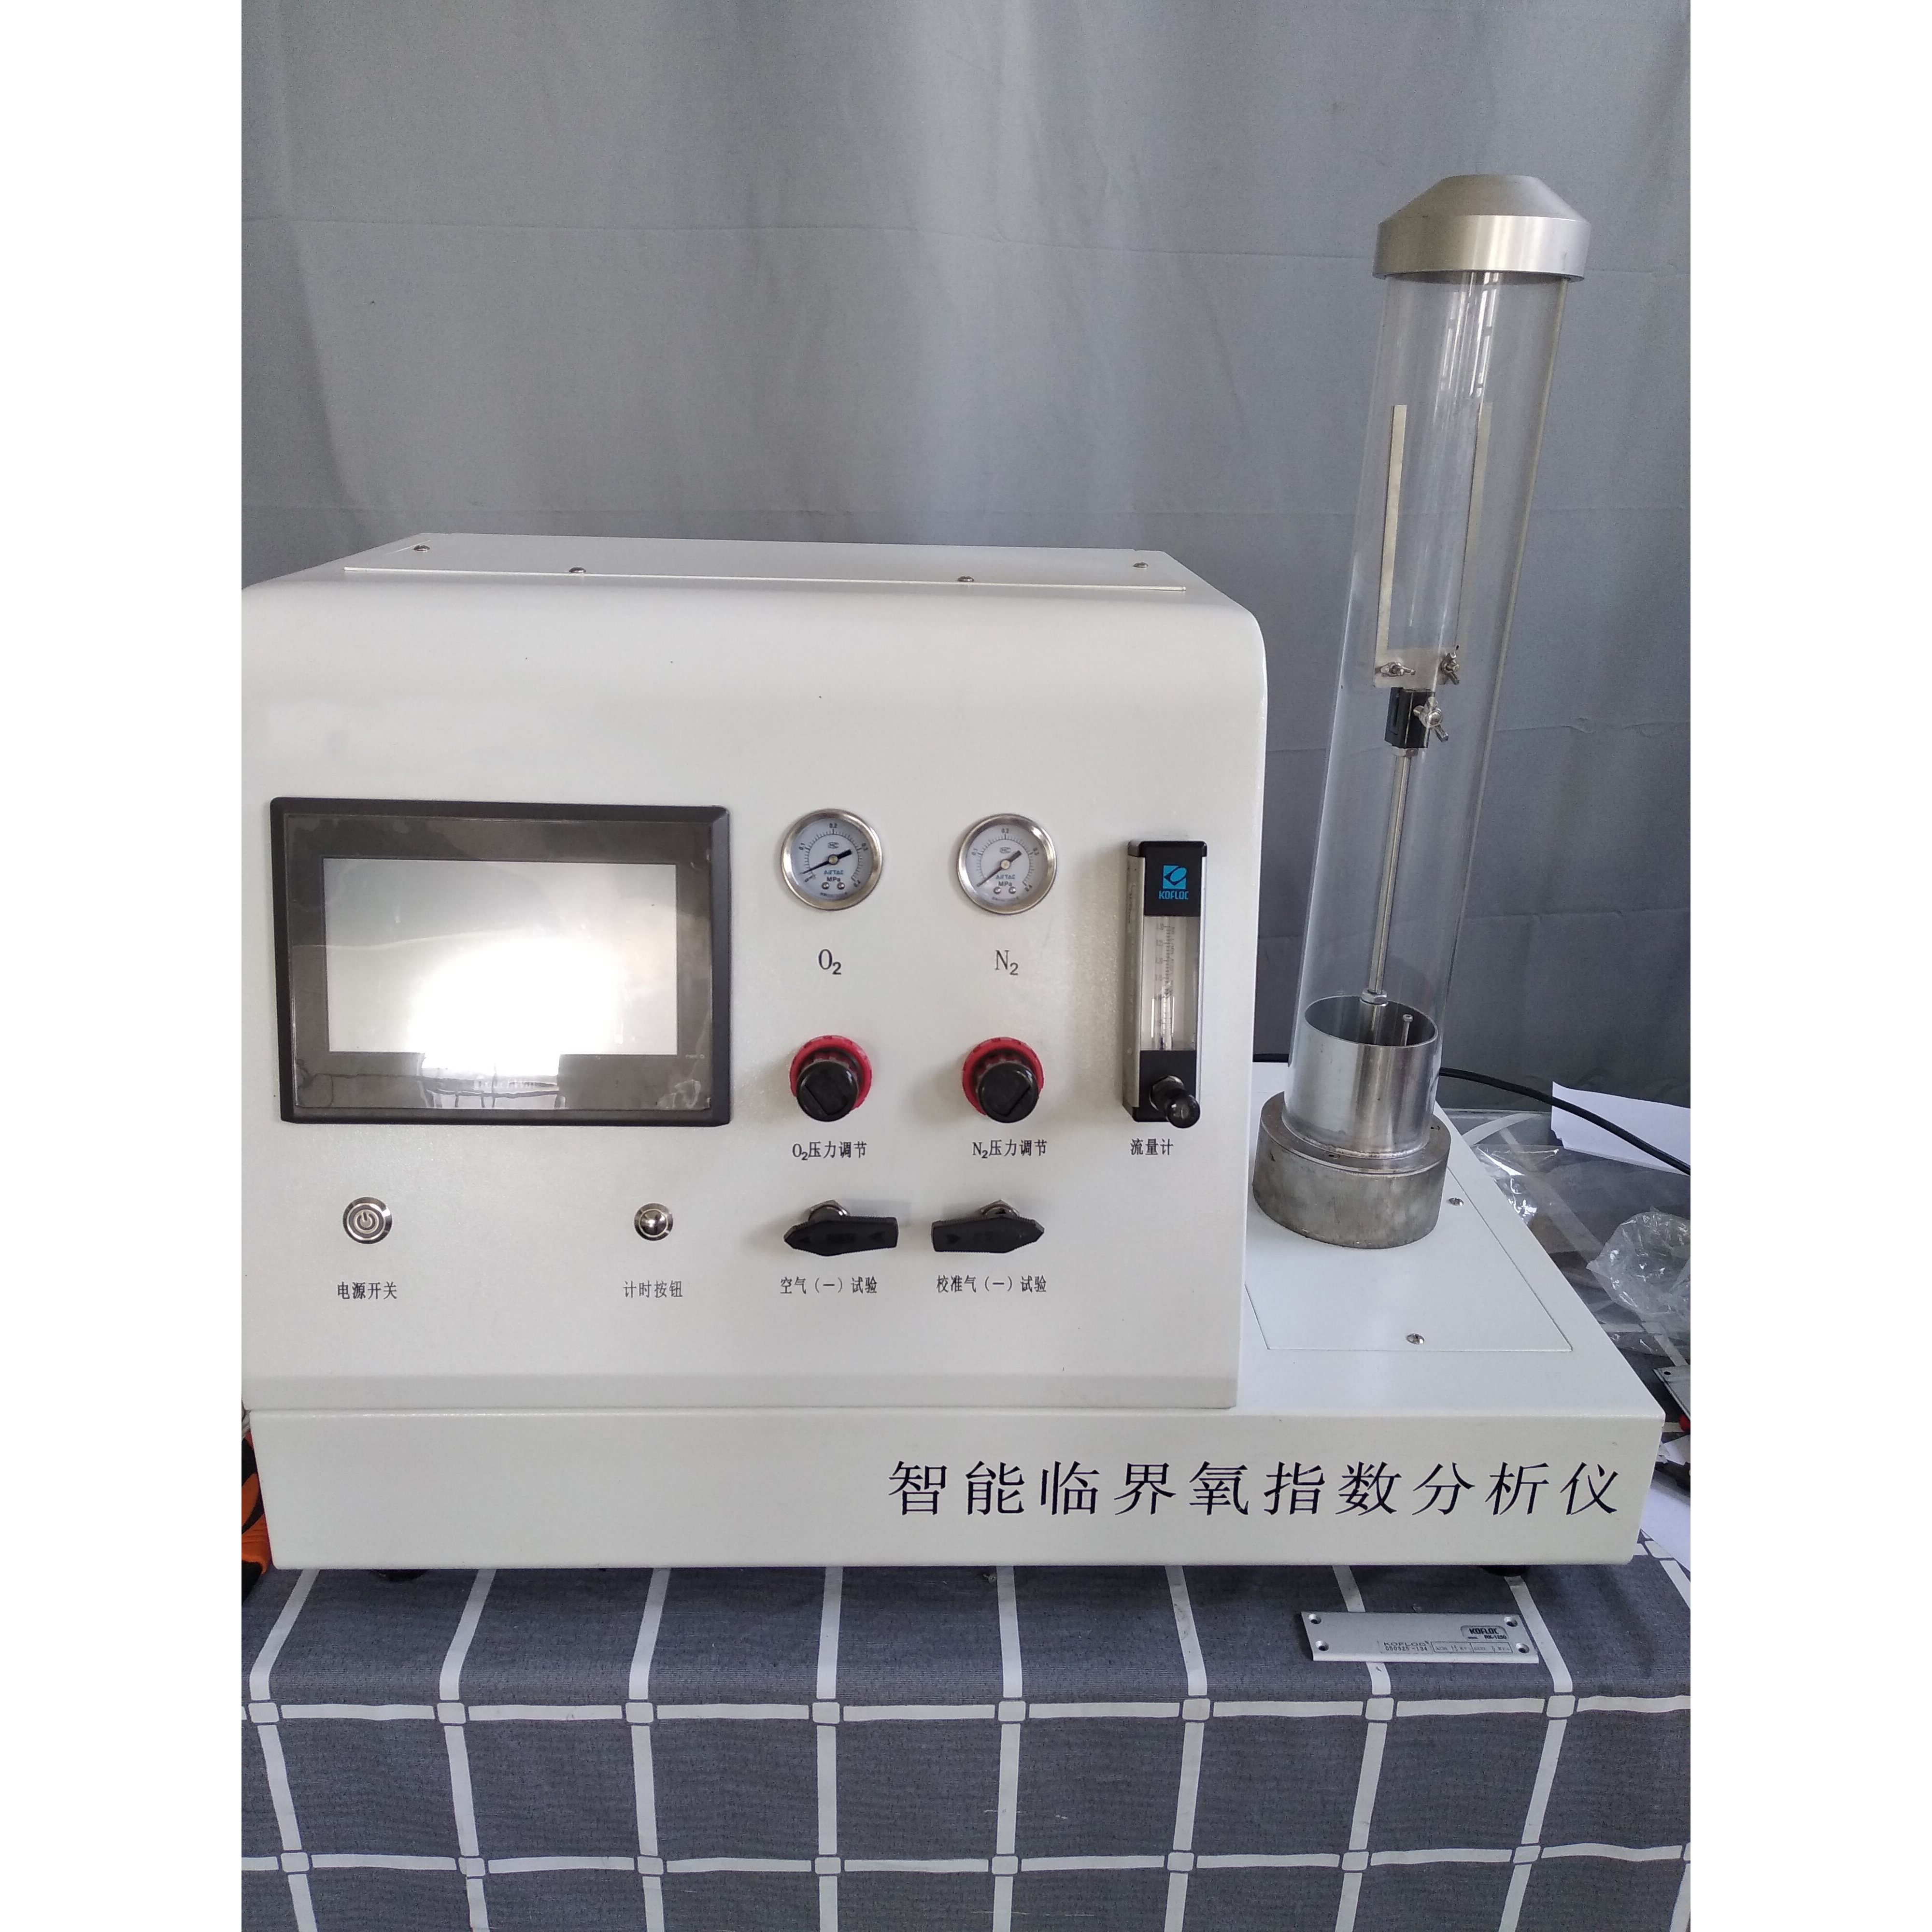 ISO 4589-2 Limited/ Limiting Oxygen Index Tester, ISO 4589-3 Elevatd-Temperature Oxygen Index Tester